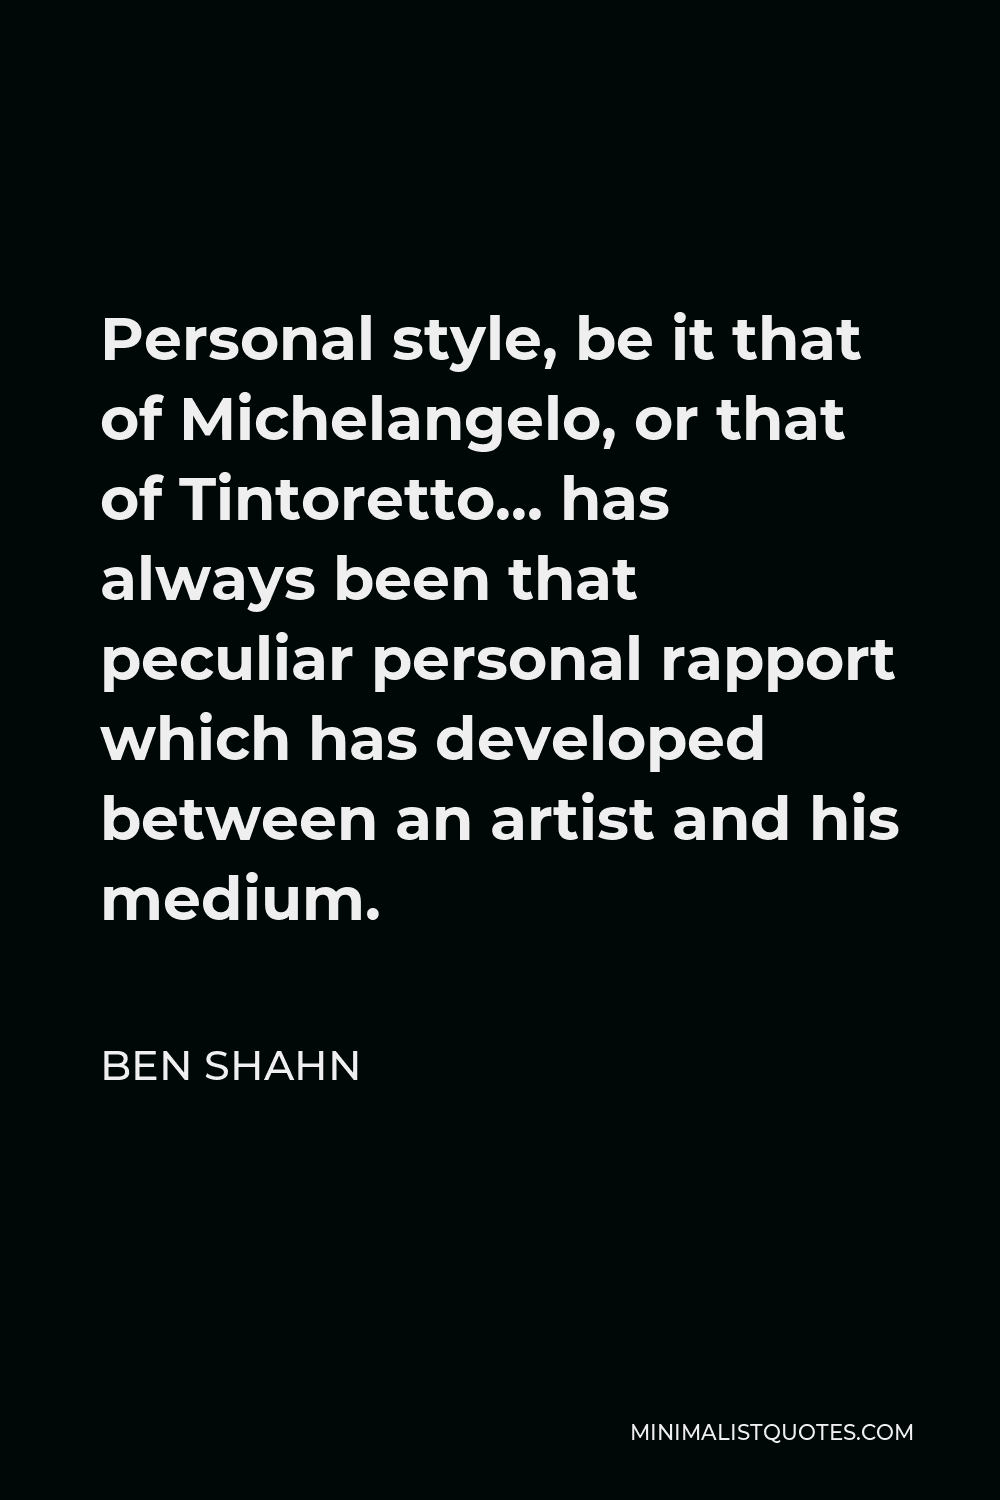 Ben Shahn Quote - Personal style, be it that of Michelangelo, or that of Tintoretto… has always been that peculiar personal rapport which has developed between an artist and his medium.